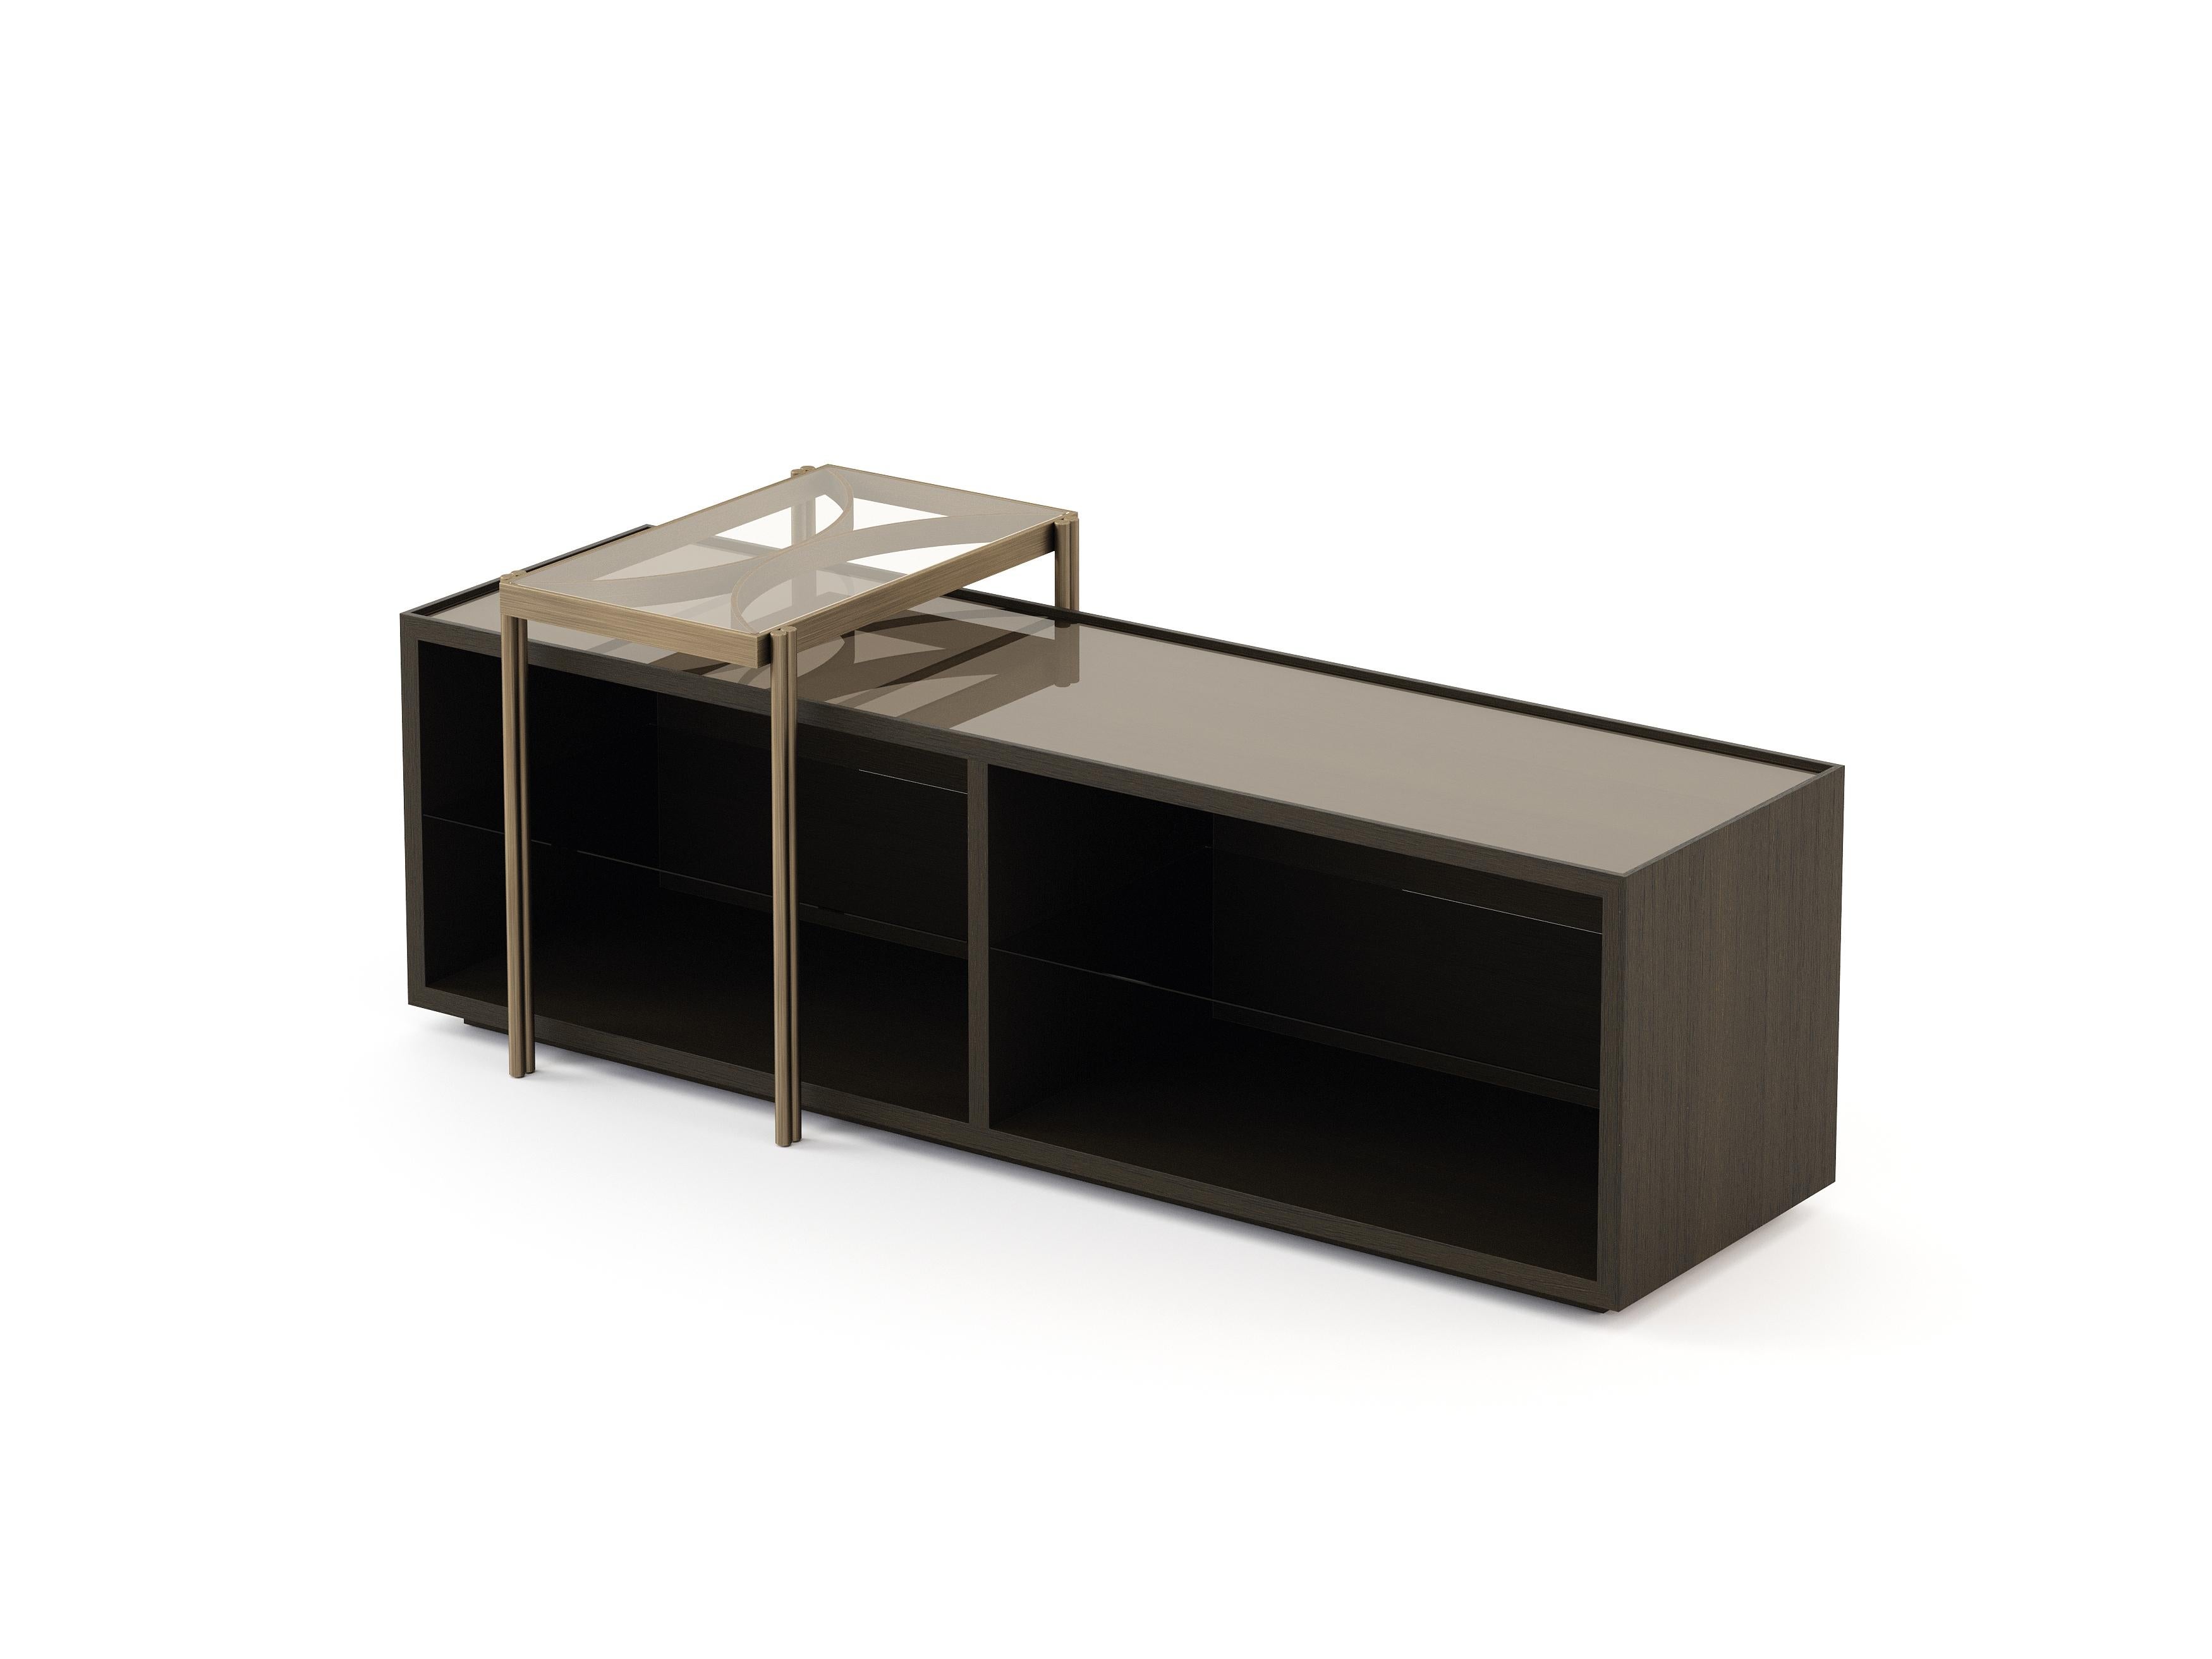 Portuguese Modern Club Console made with Oak, Brass and Glass, handmade by Stylish Club For Sale